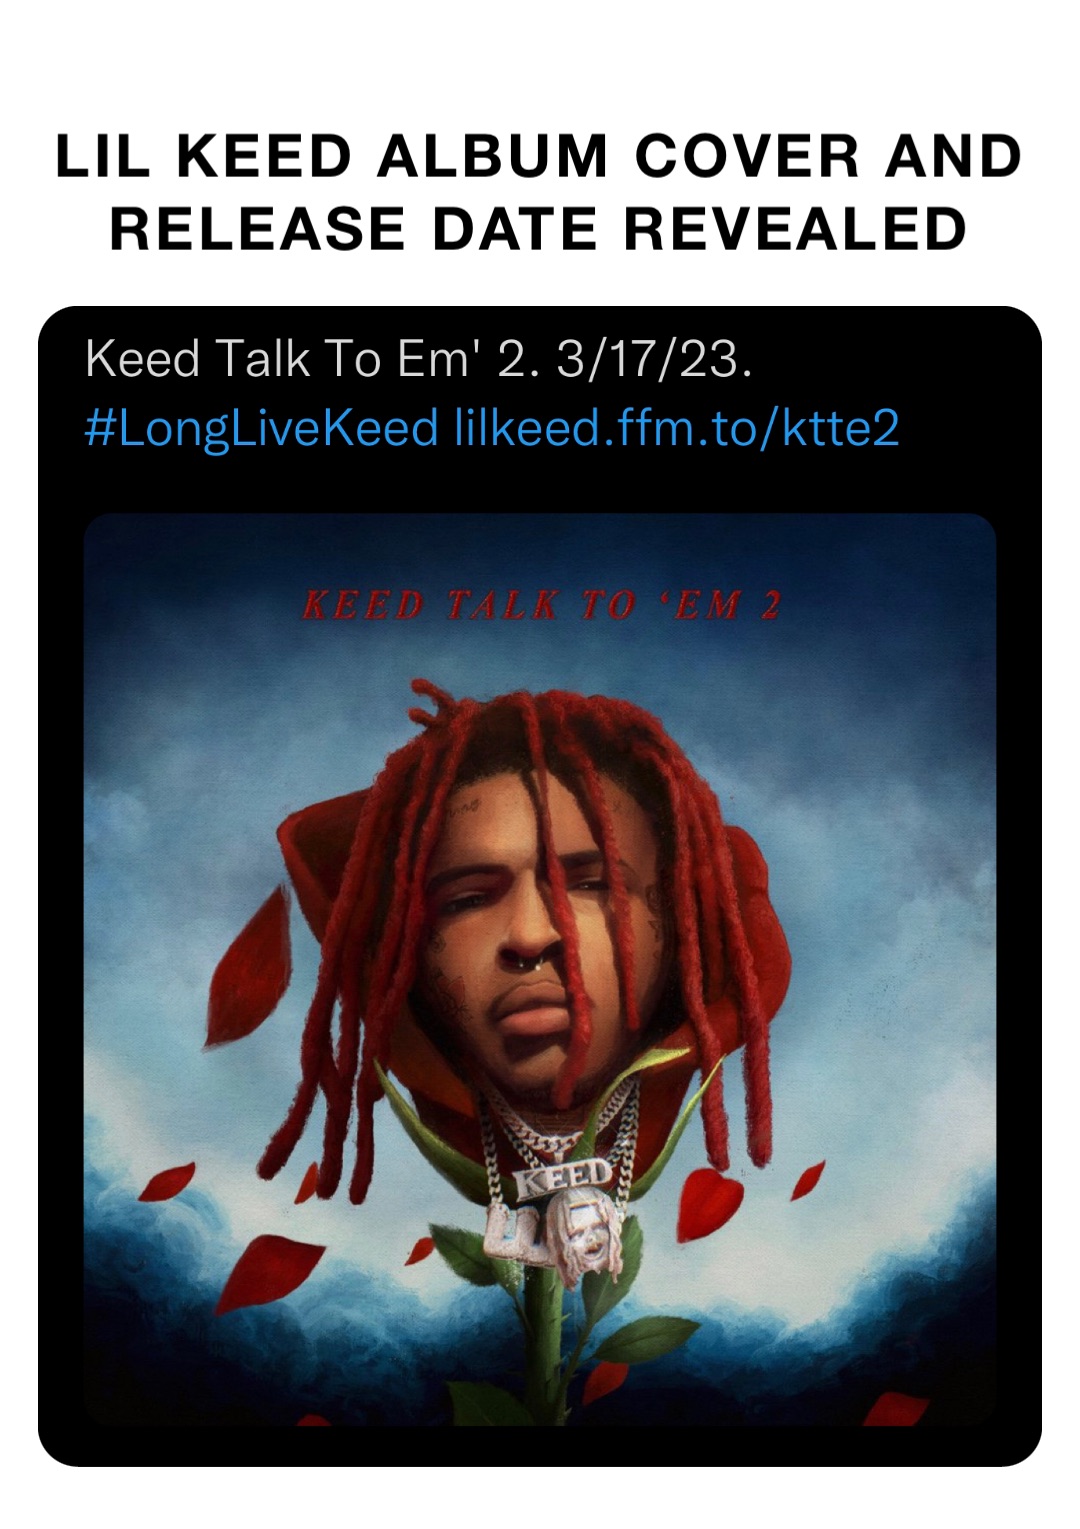 LIL KEED ALBUM COVER AND RELEASE DATE REVEALED